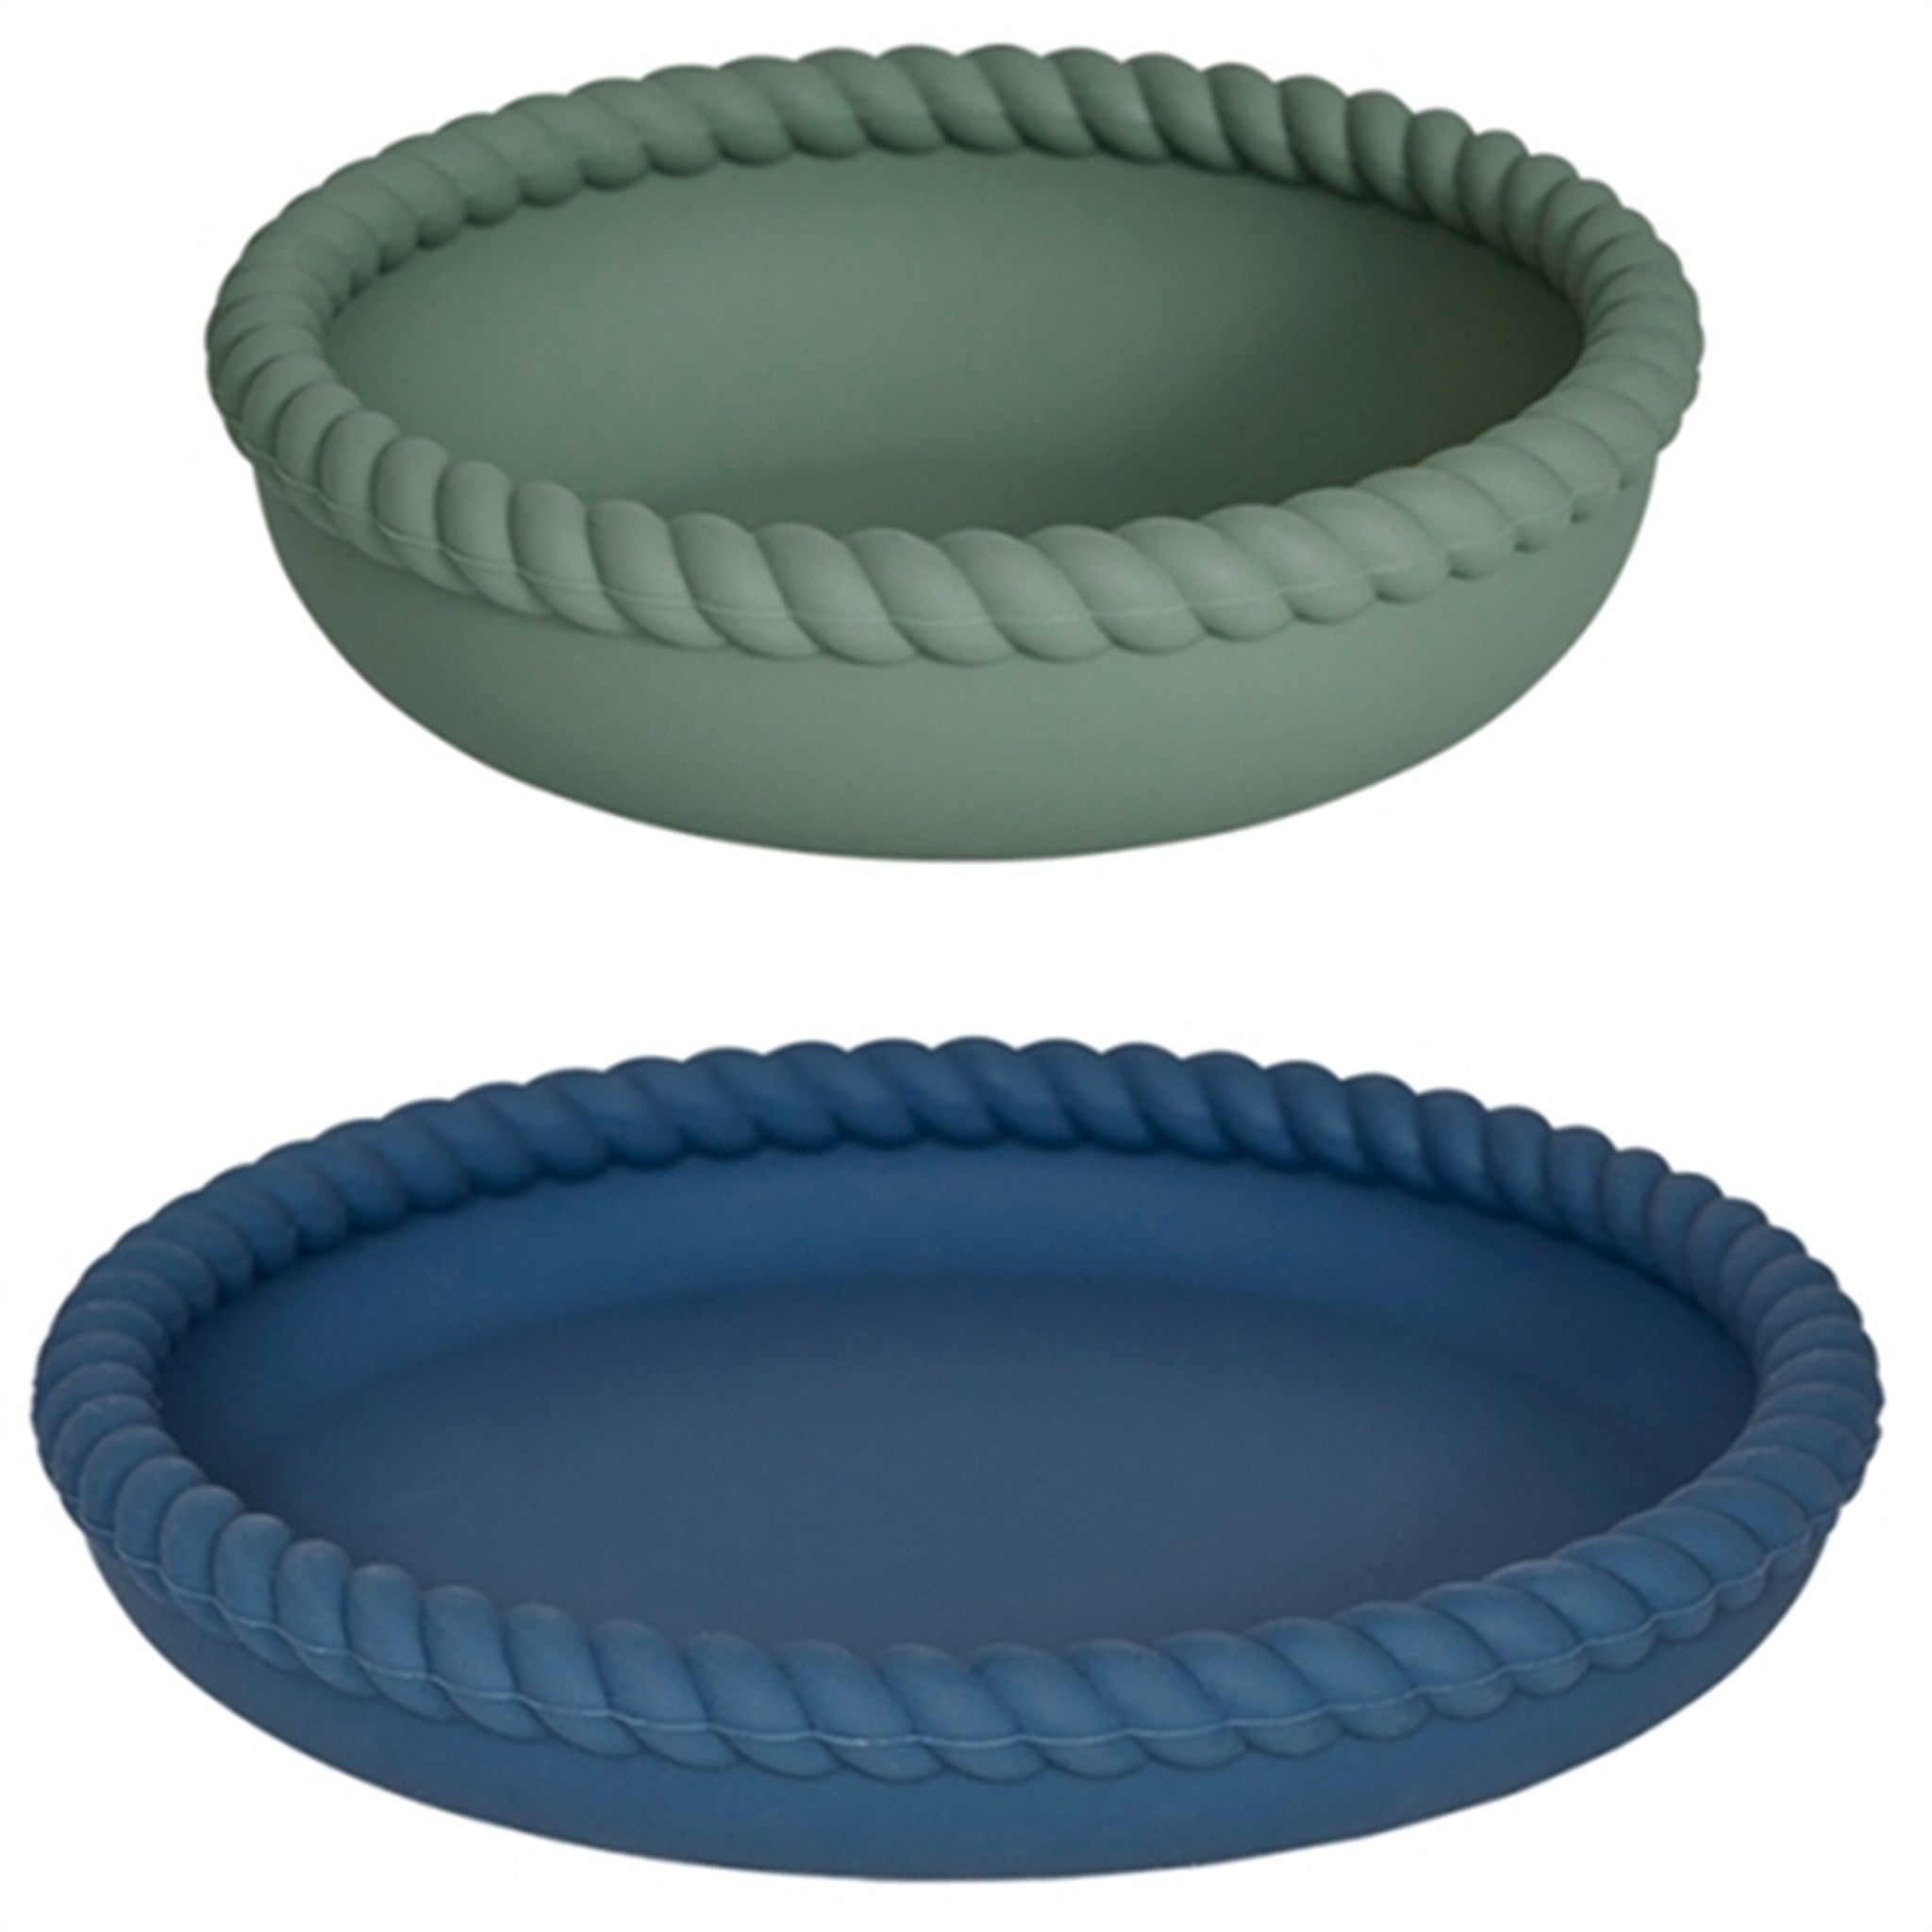 OYOY Mellow Plate And Bowl Blue/Olive